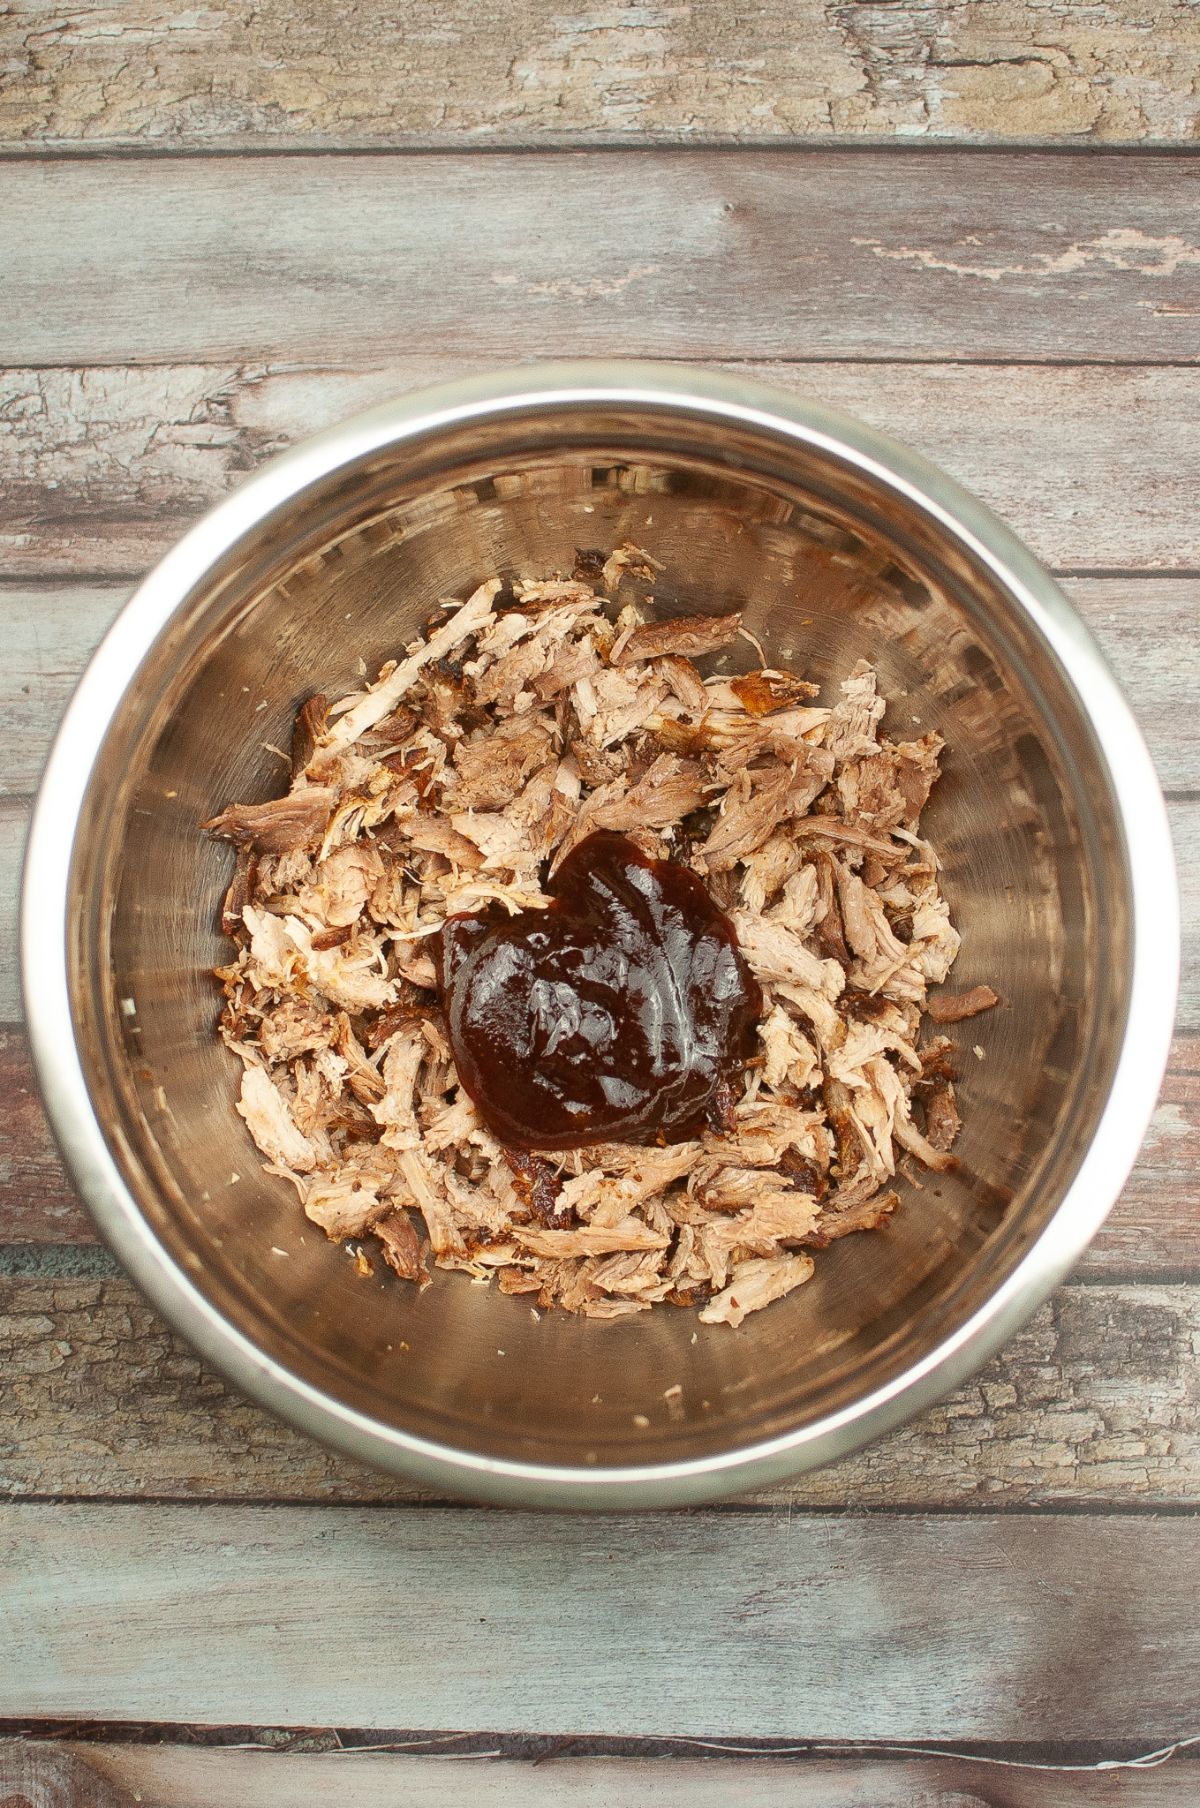 Shredded pork in a mixing bowl with BBQ sauce.